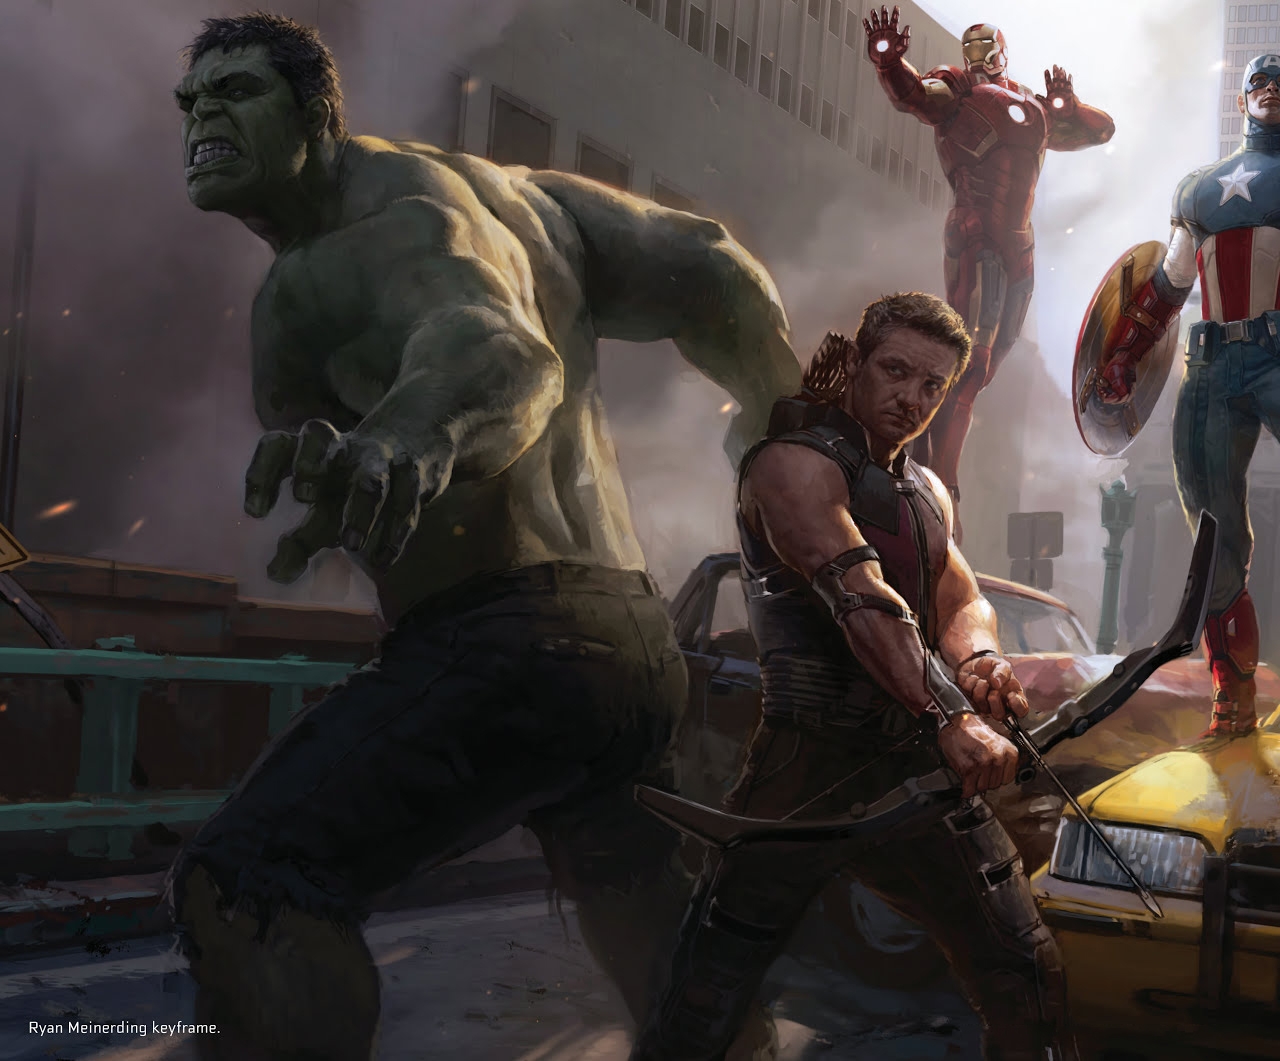 The Road to Marvel's Avengers Age of Ultron - The Art of the Marvel Cinematic Universe 2